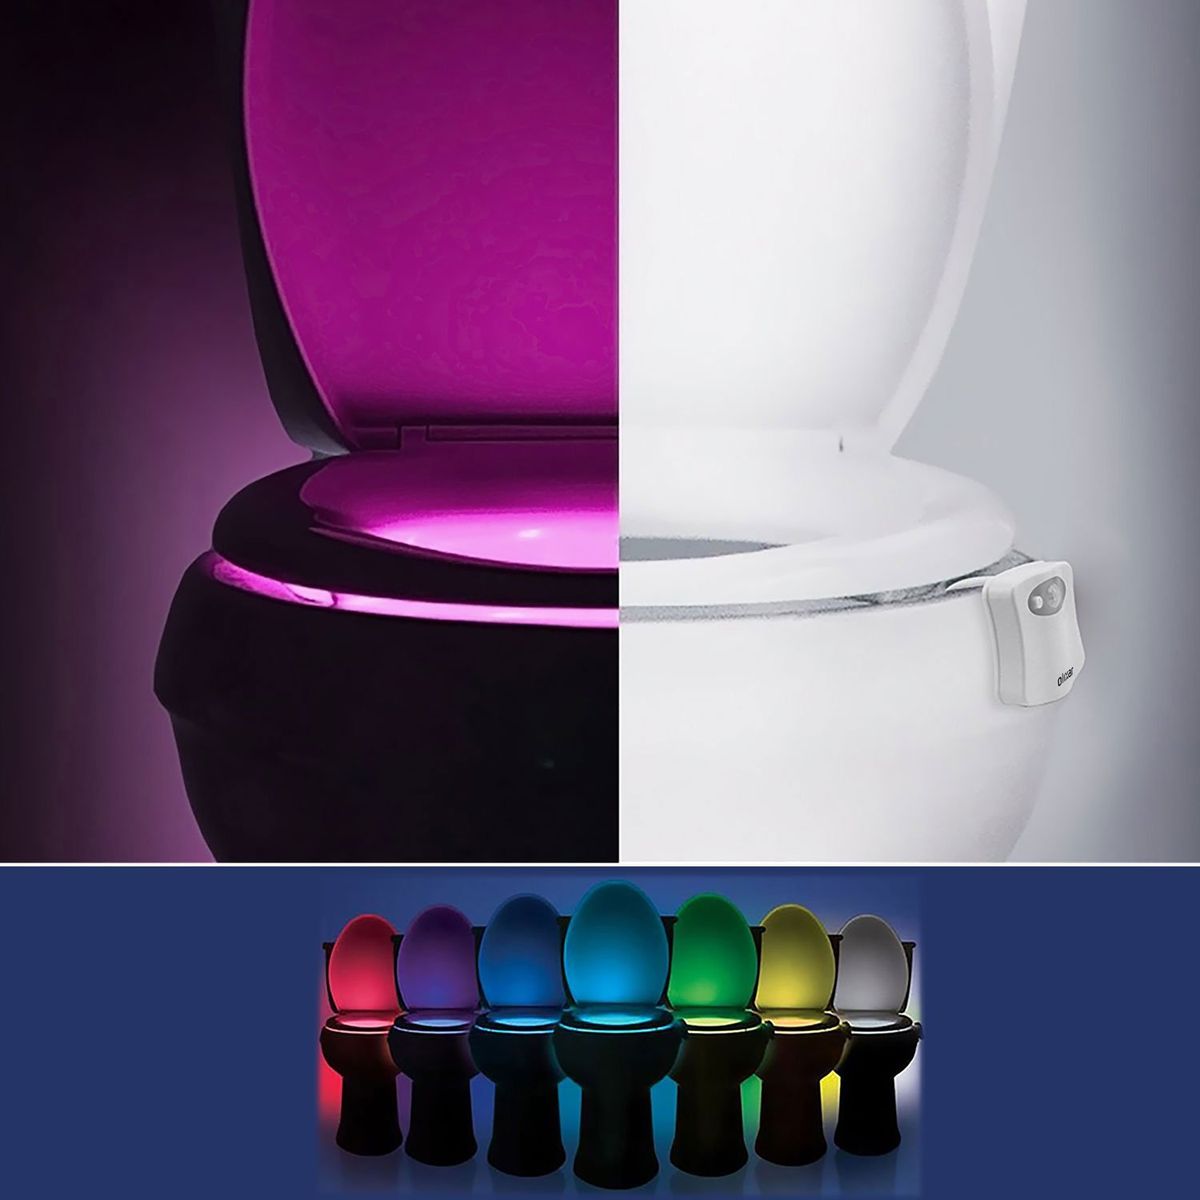 Olixar's toilet night light is the weirdest thing you never knew you wanted